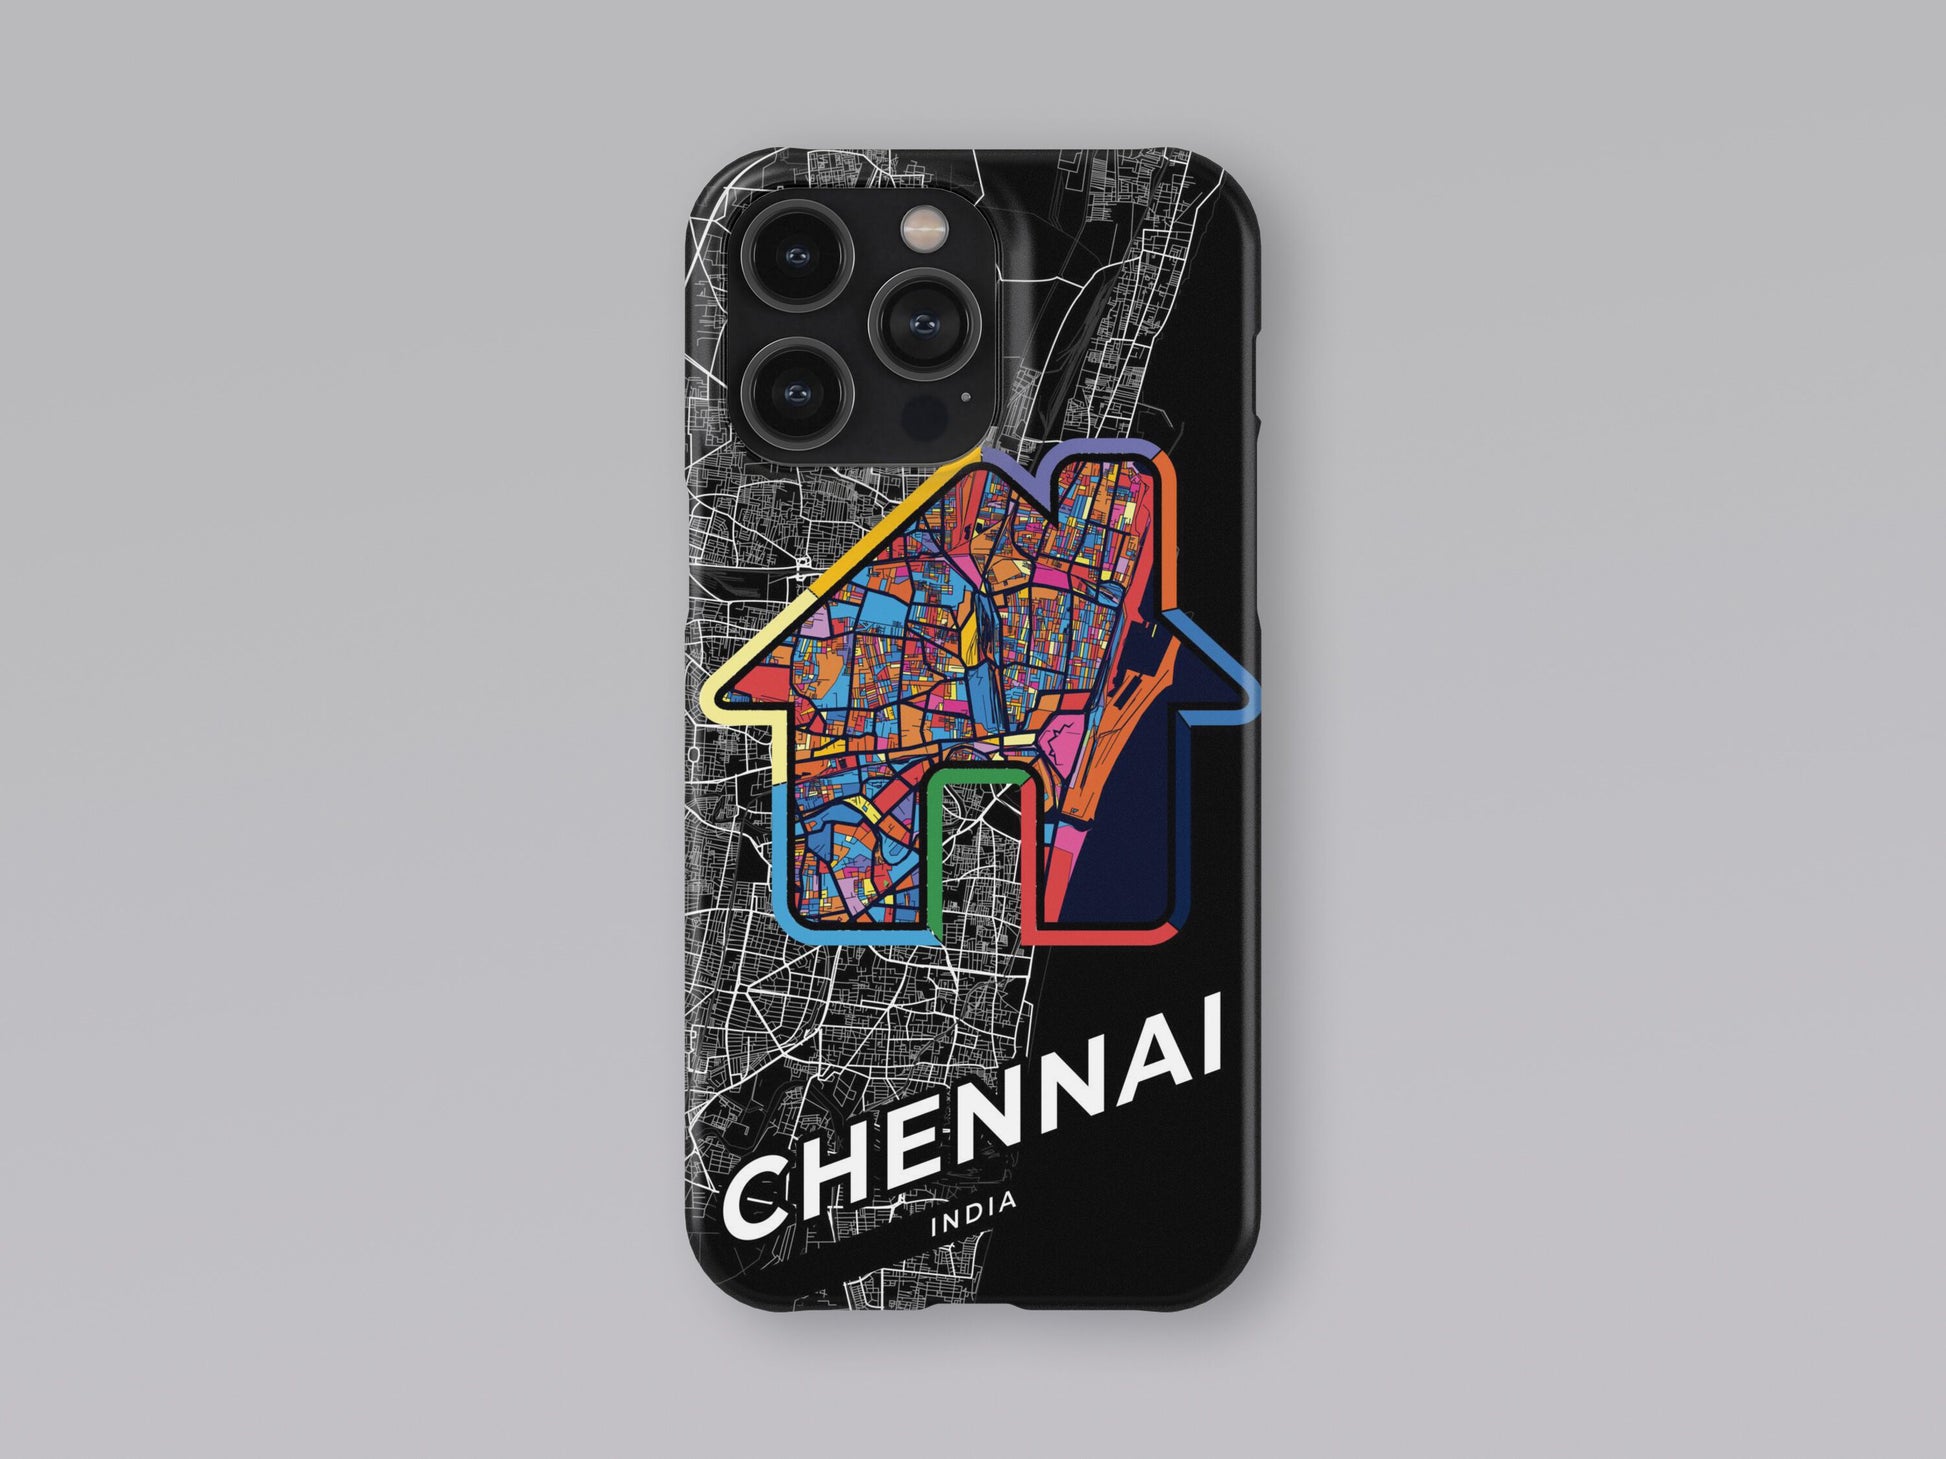 Chennai India slim phone case with colorful icon. Birthday, wedding or housewarming gift. Couple match cases. 3